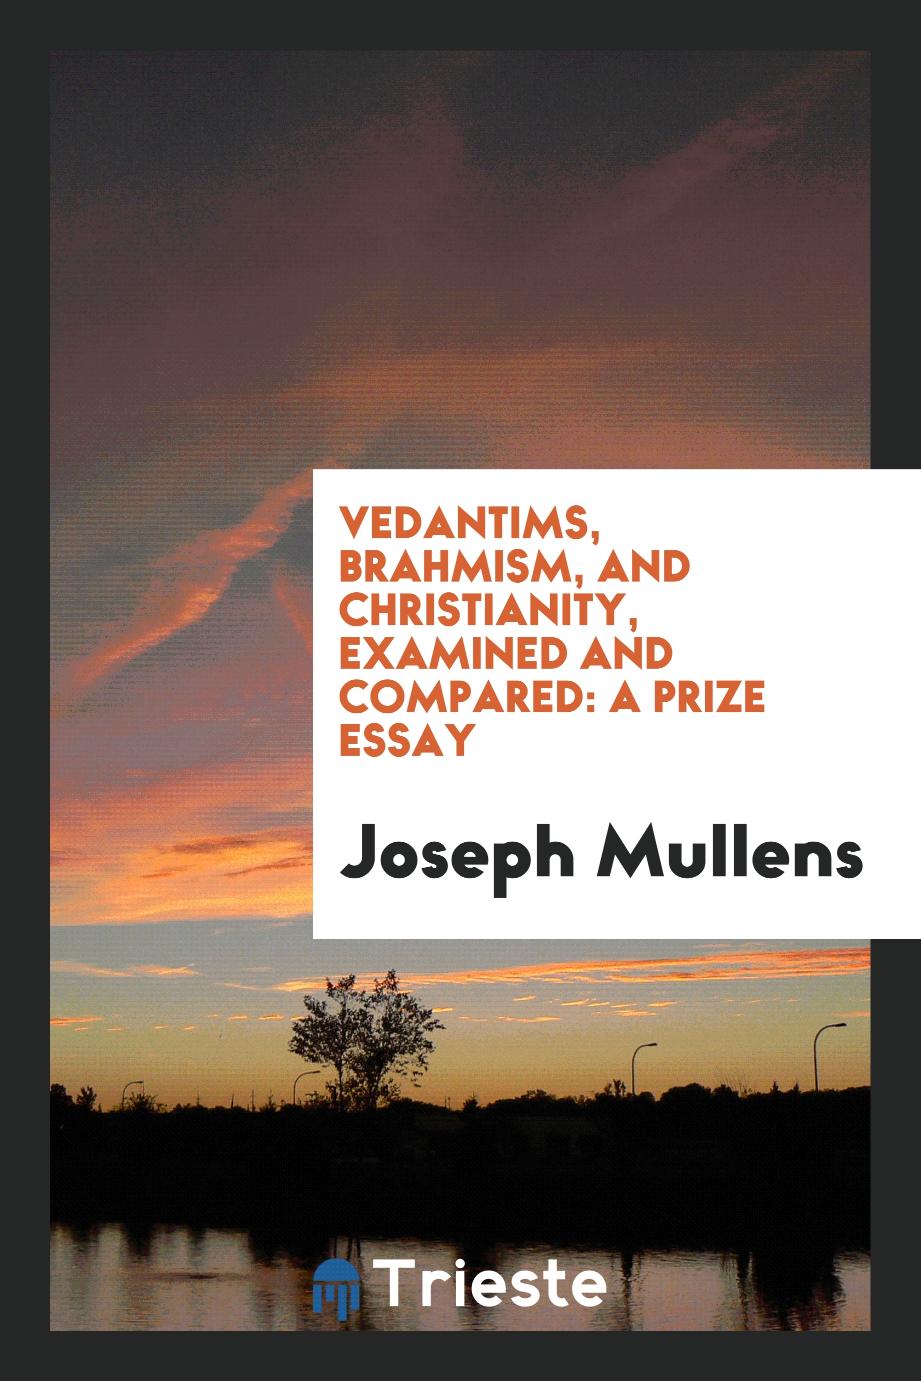 Vedantims, Brahmism, and Christianity, examined and compared: a prize essay